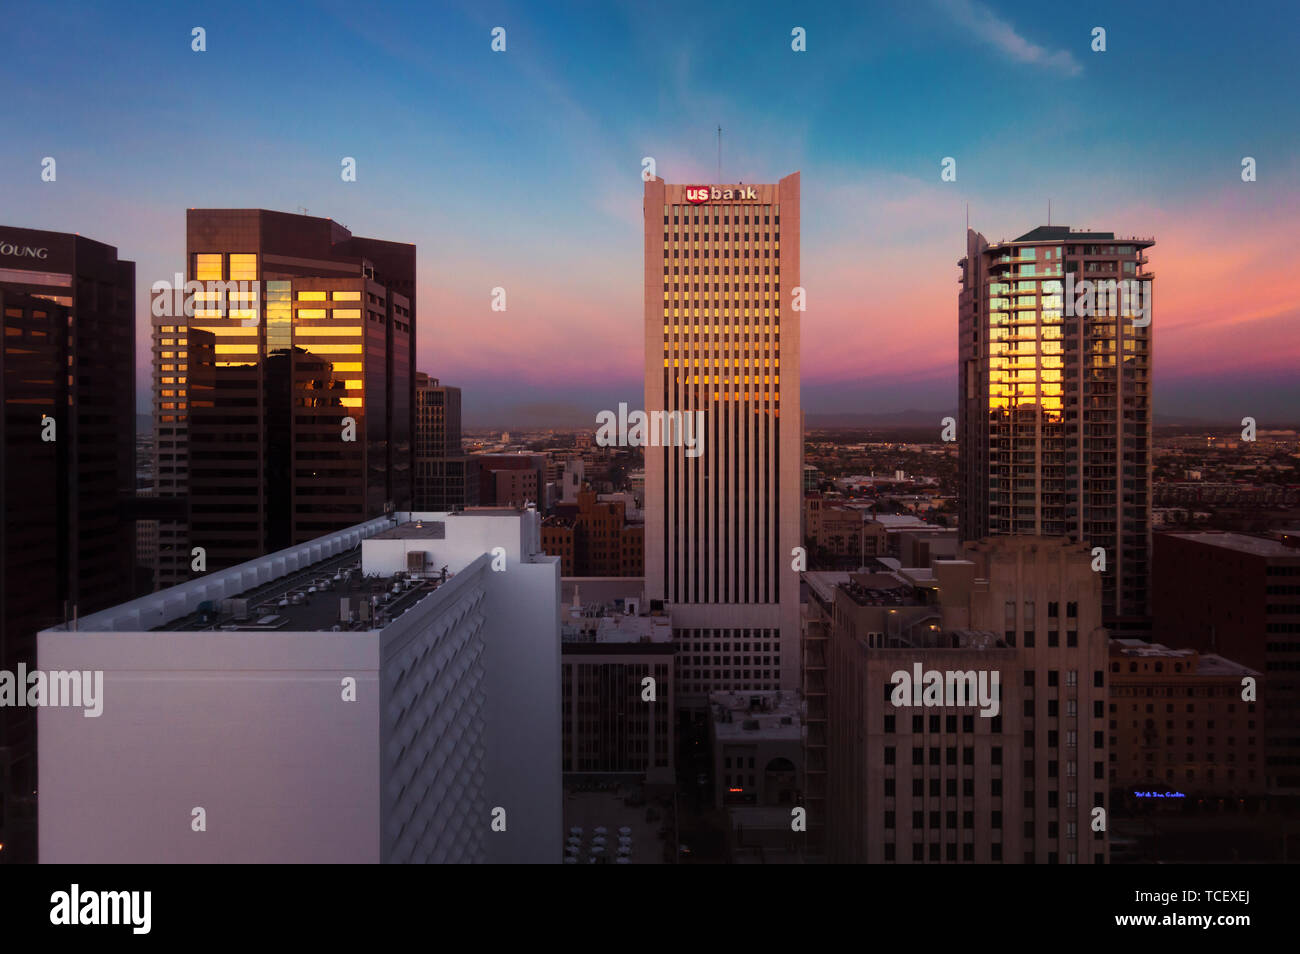 Phoenix, ARIZONA - October 21 2017: Skyscrapers in central Phoenix in sunrise light. View from the 22nd floor. Stock Photo